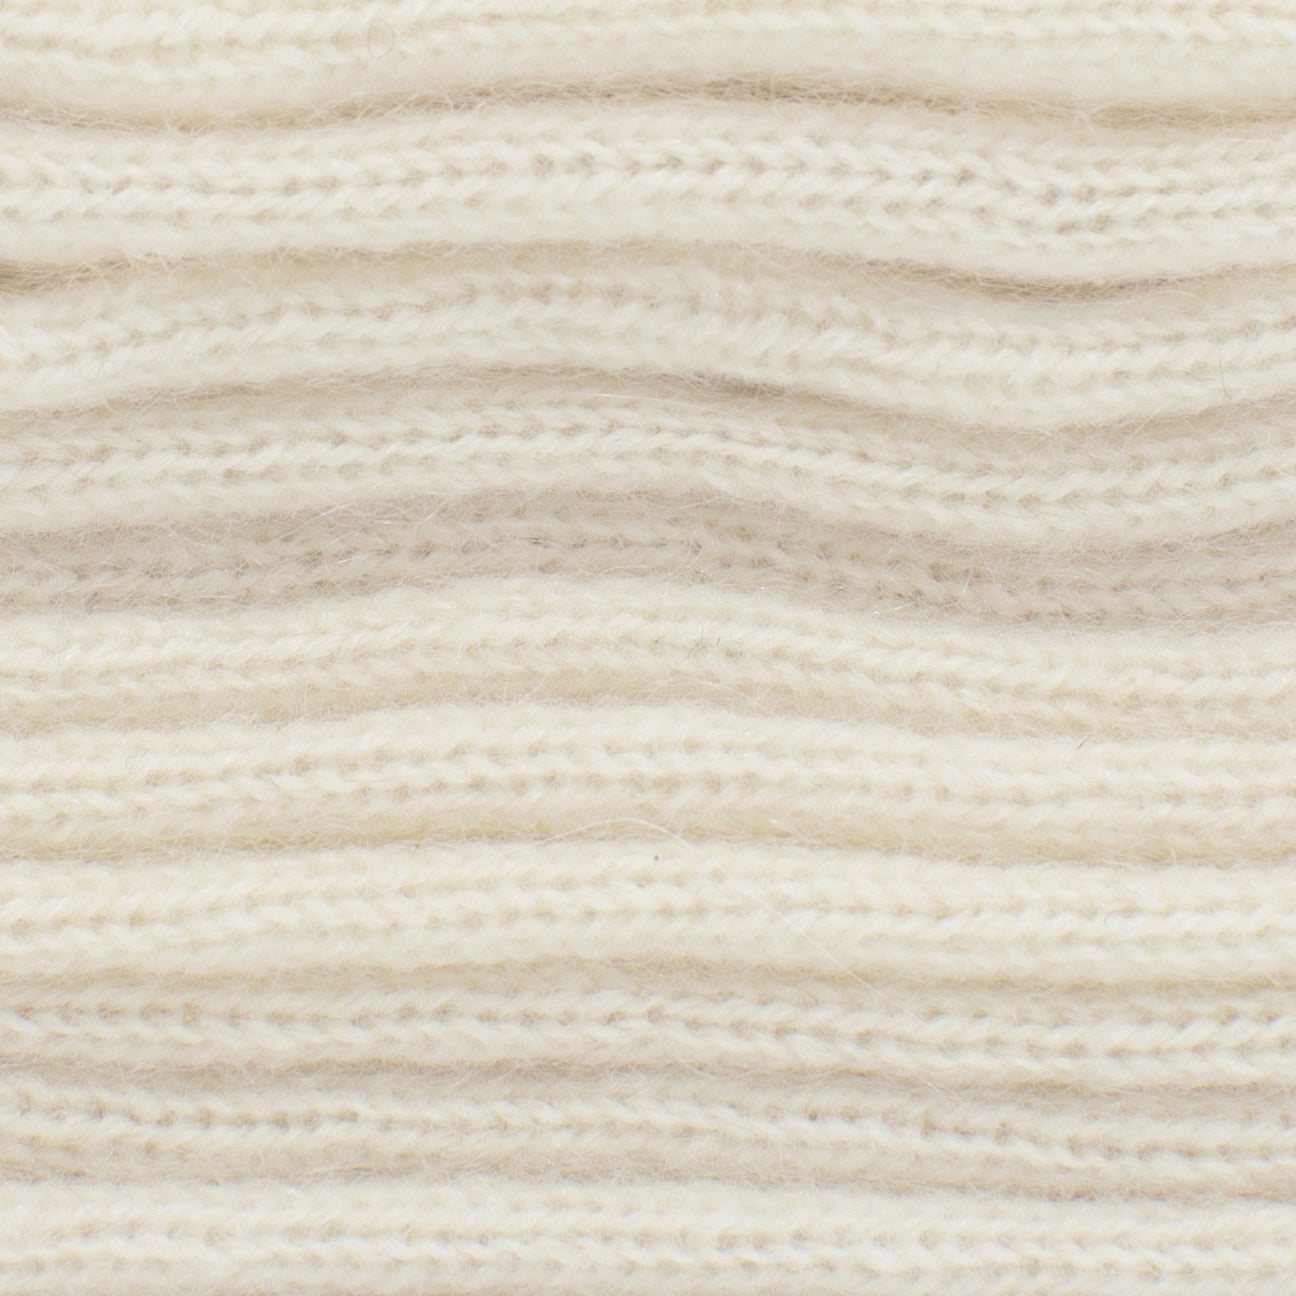 A natural white Cashmere knitted shawl